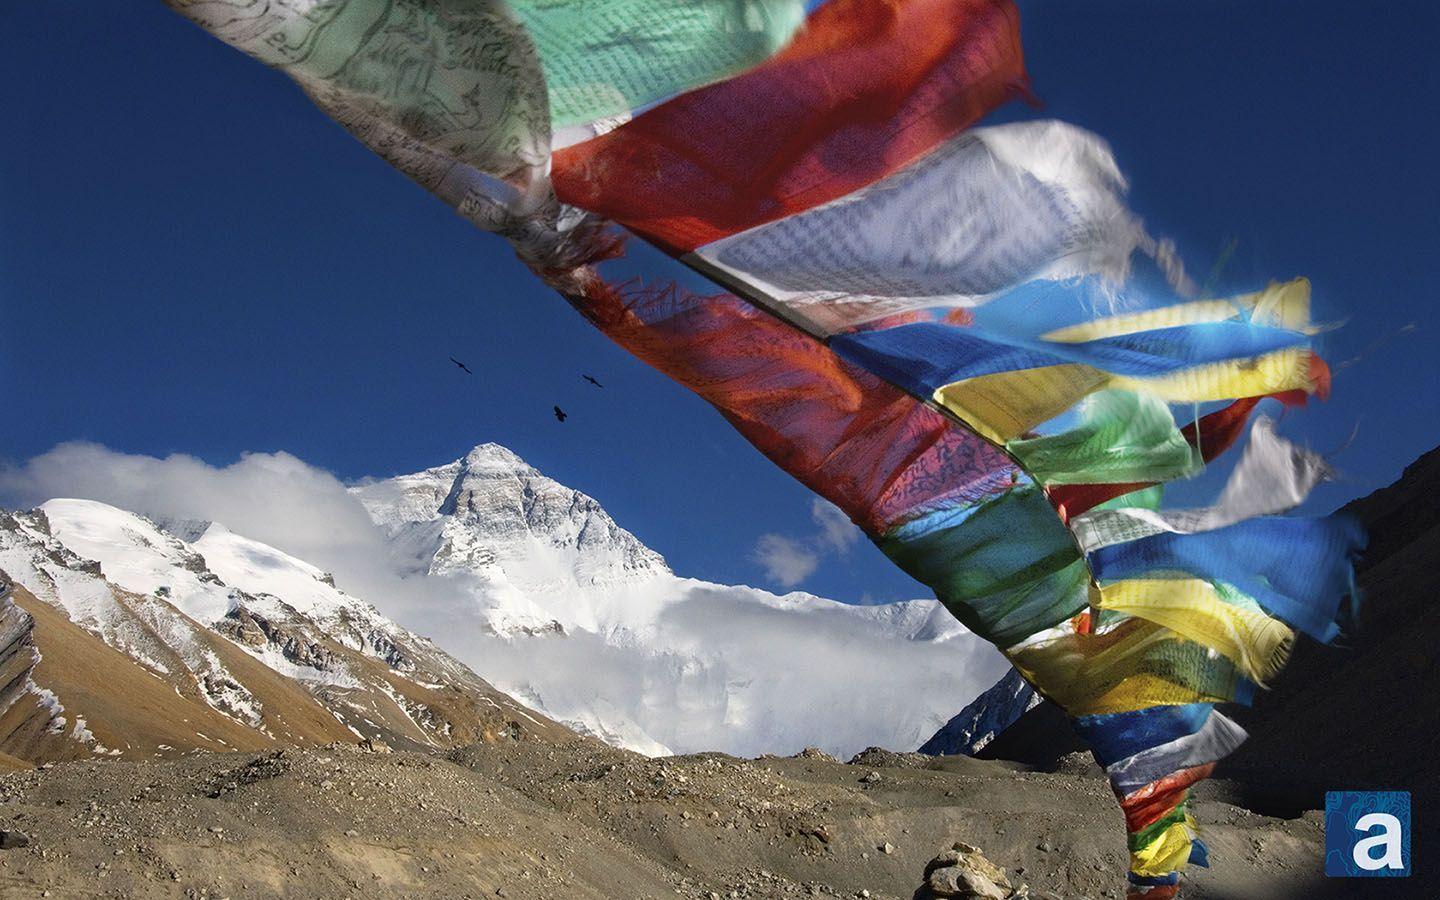 Wallpapers Wednesday: Mt. Everest and Prayer Flags